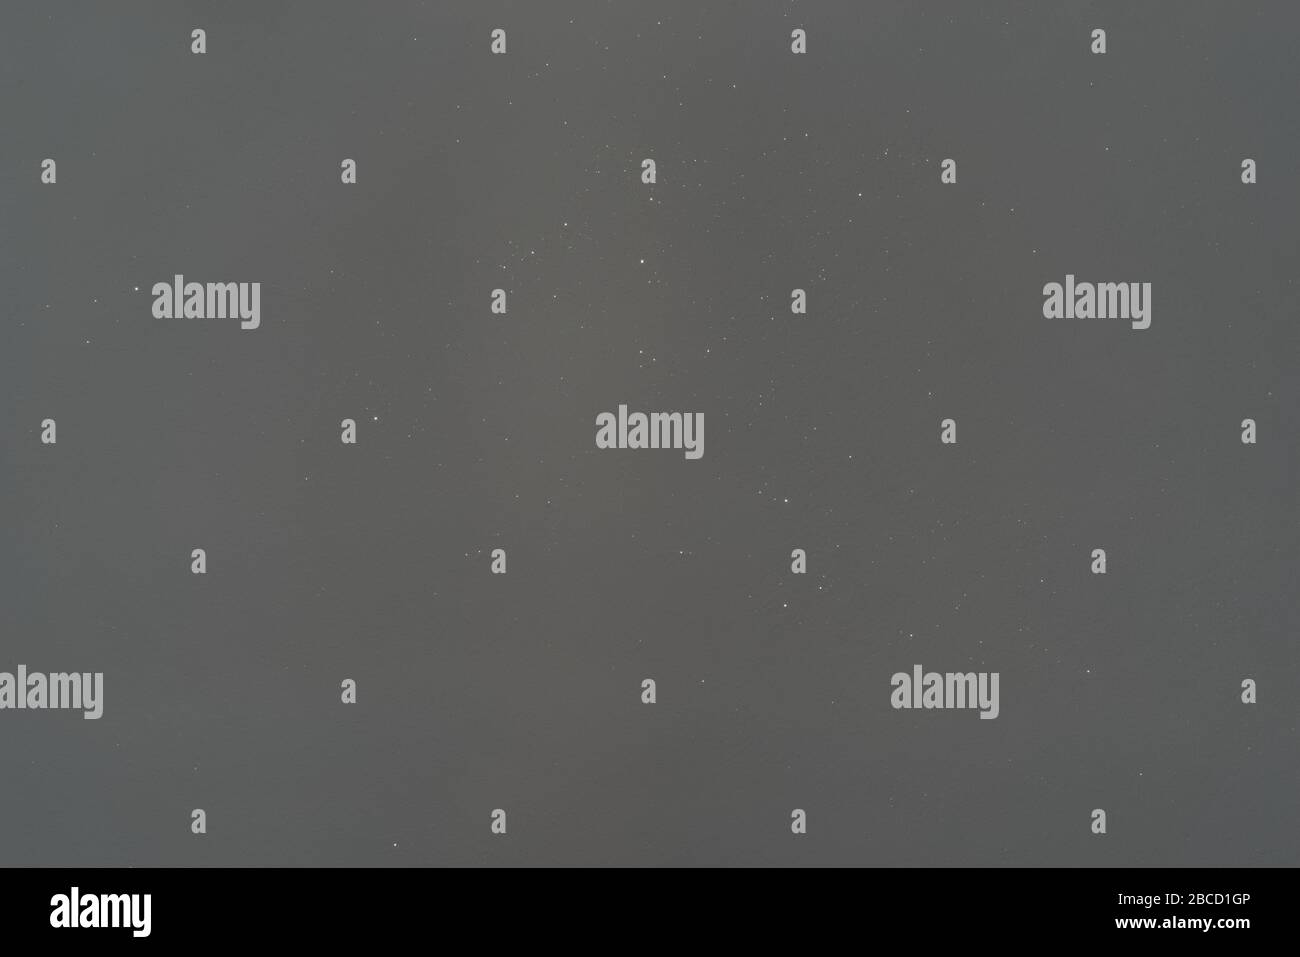 Full Frame Of Gray Abstract Background With Silver Glitter Stock